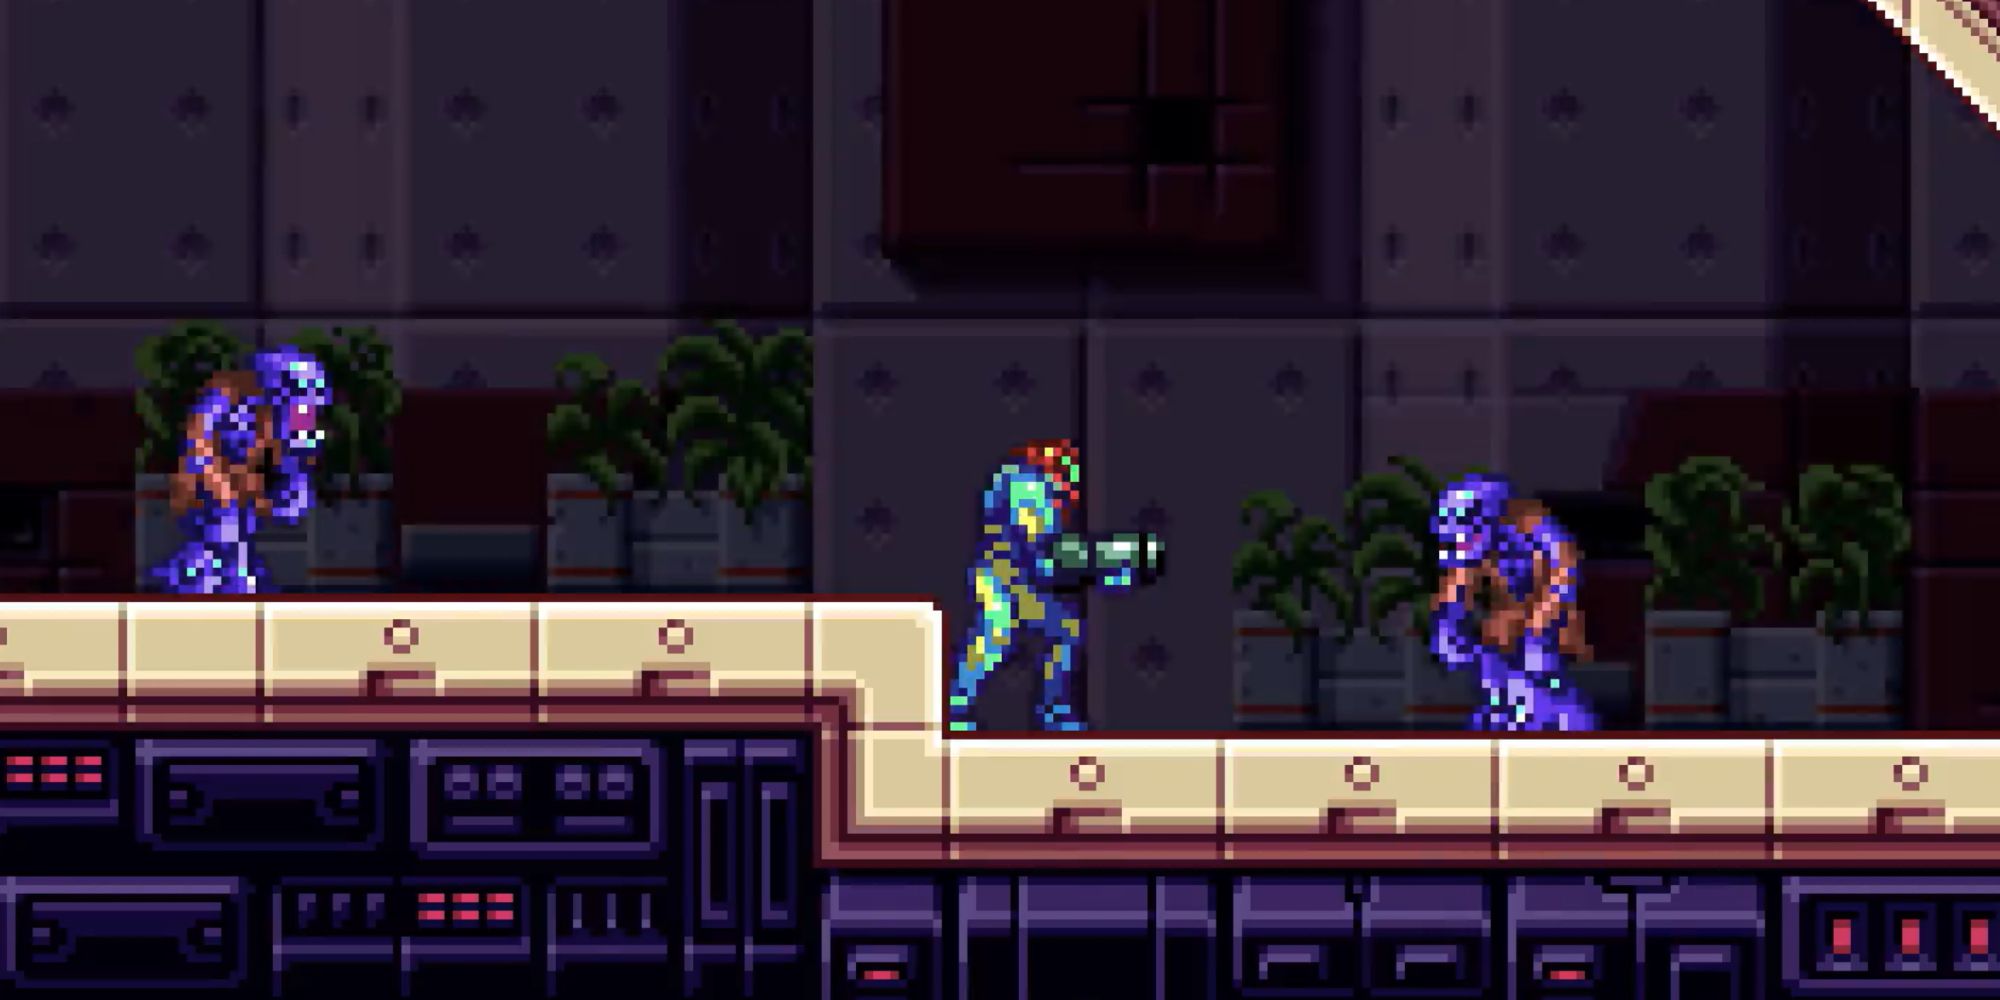 Samus in Metroid Fusion wih two purple zombie monsters coming from the left and right.